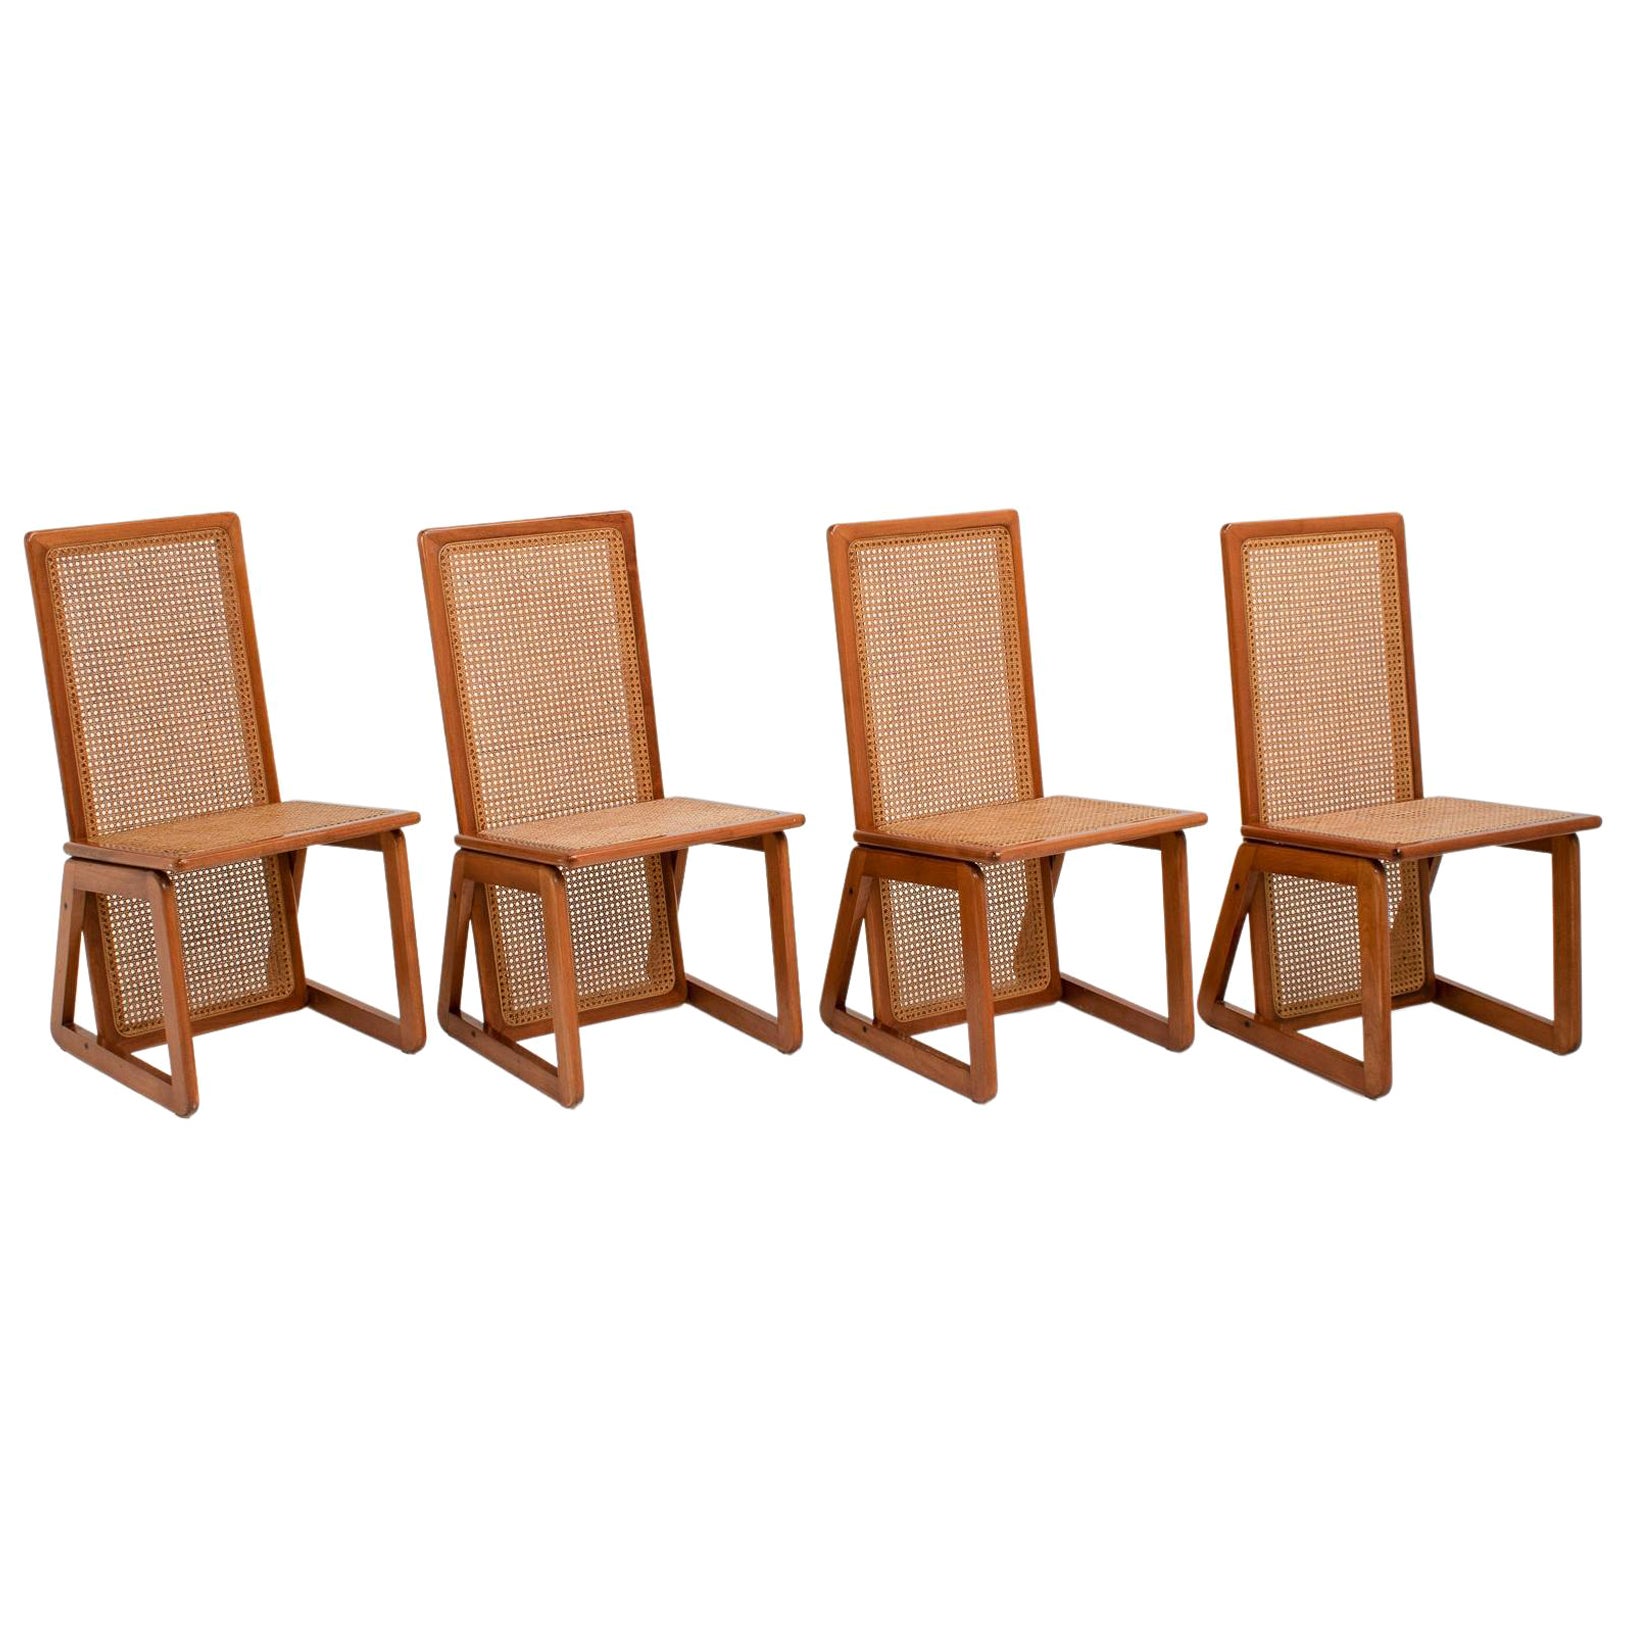 Set of 4 Italian High-Back Dining Chairs in Wood & Cane, 1970s For Sale